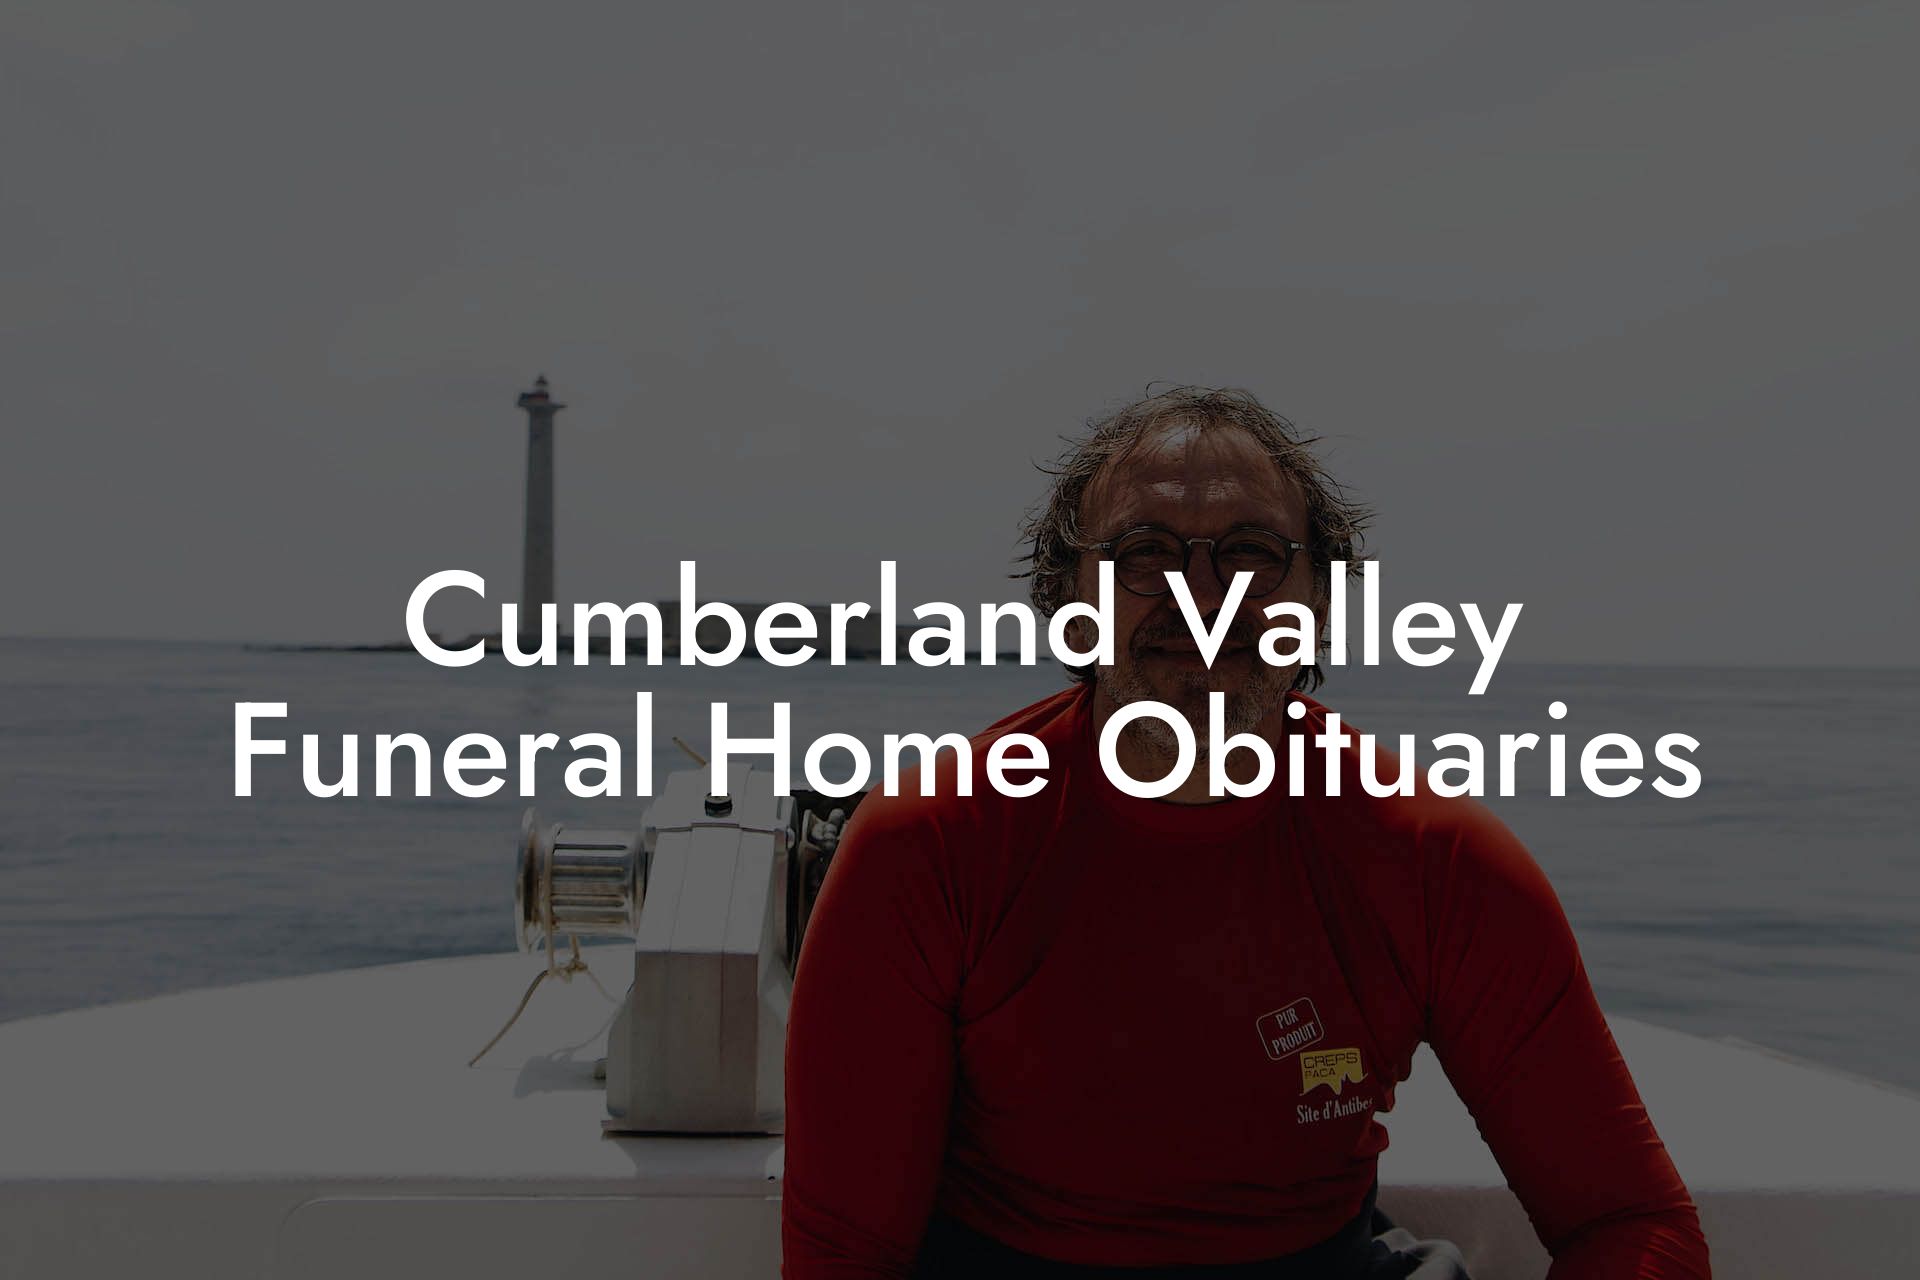 Cumberland Valley Funeral Home Obituaries